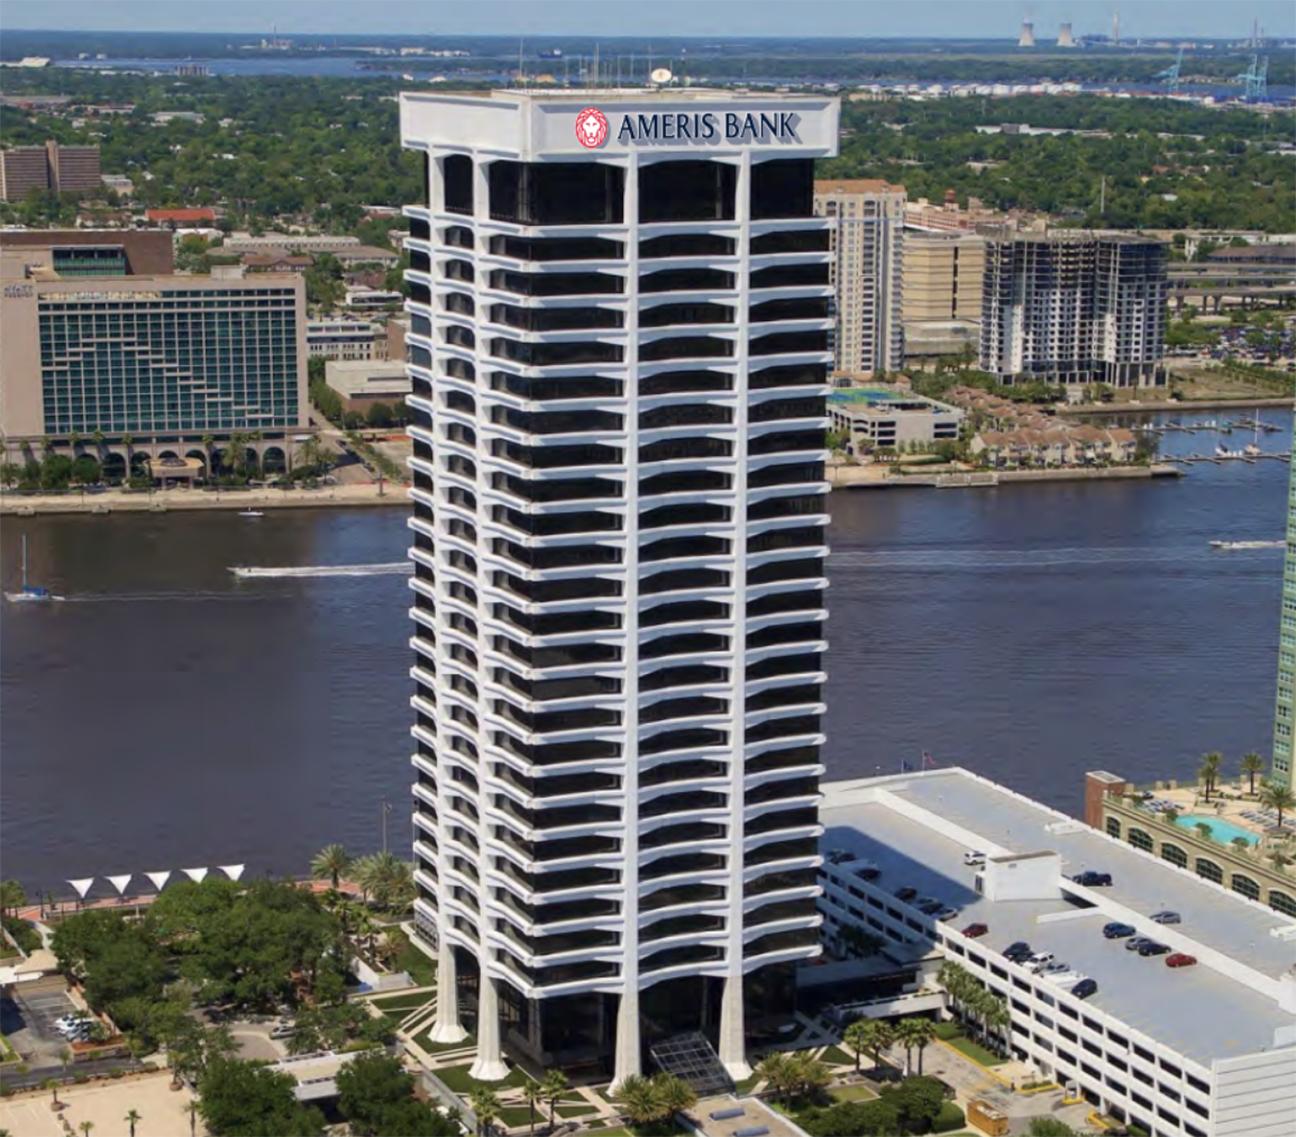 BDO Jacksonville plans to move to the ninth floor of Riverplace Towre at 1301 Riverplace Blvd.